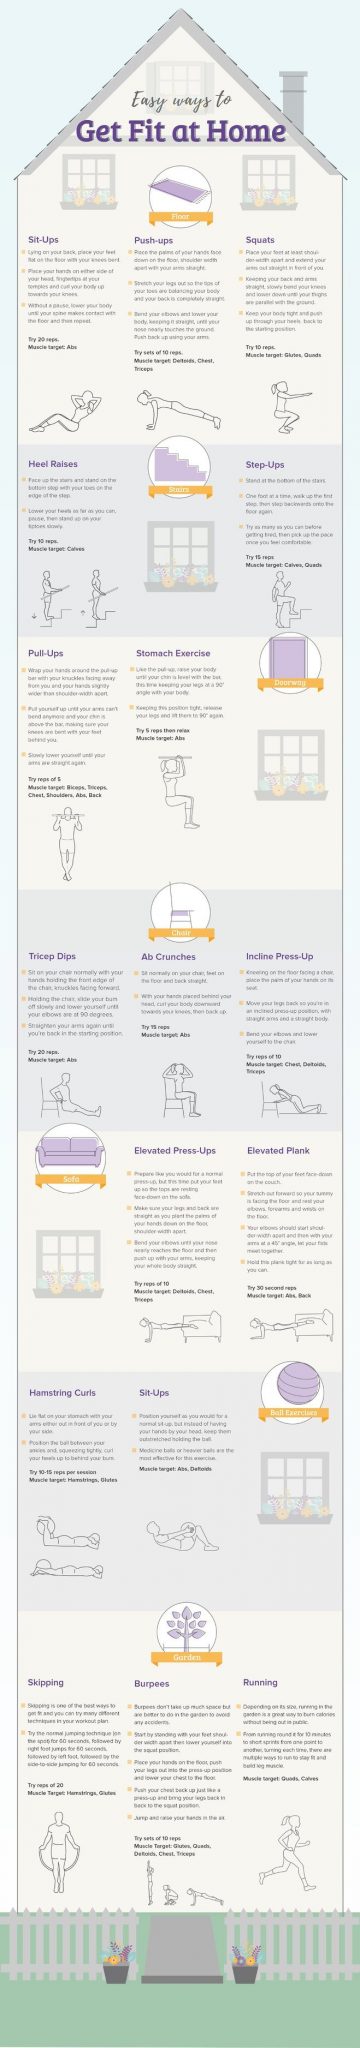 easy ways to get fit at home infographic